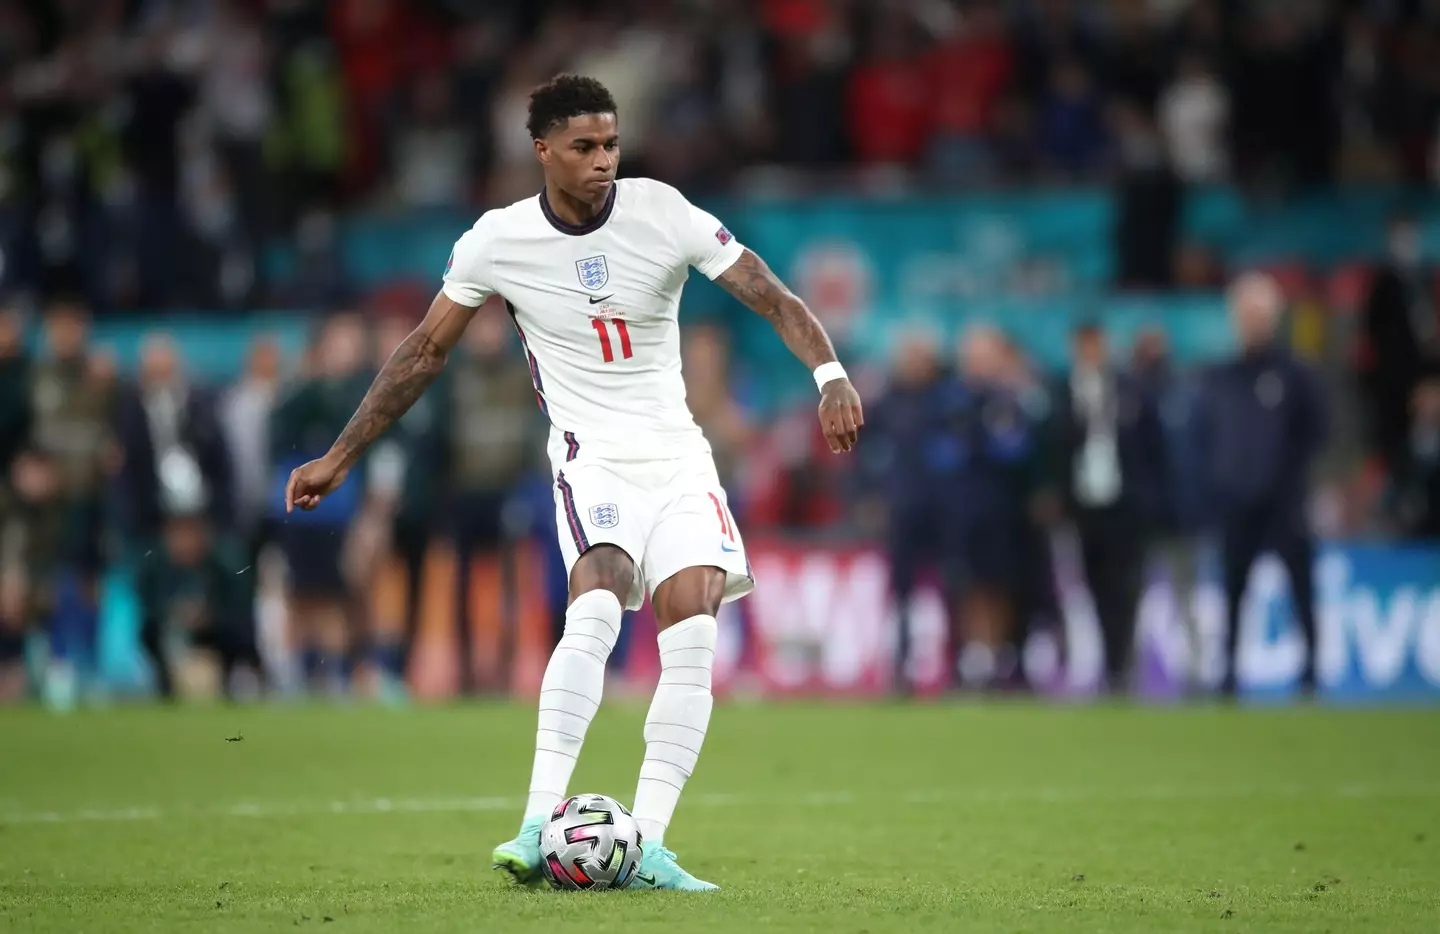 Rashford has not featured for England since the final of Euro 2020 (Image: PA)